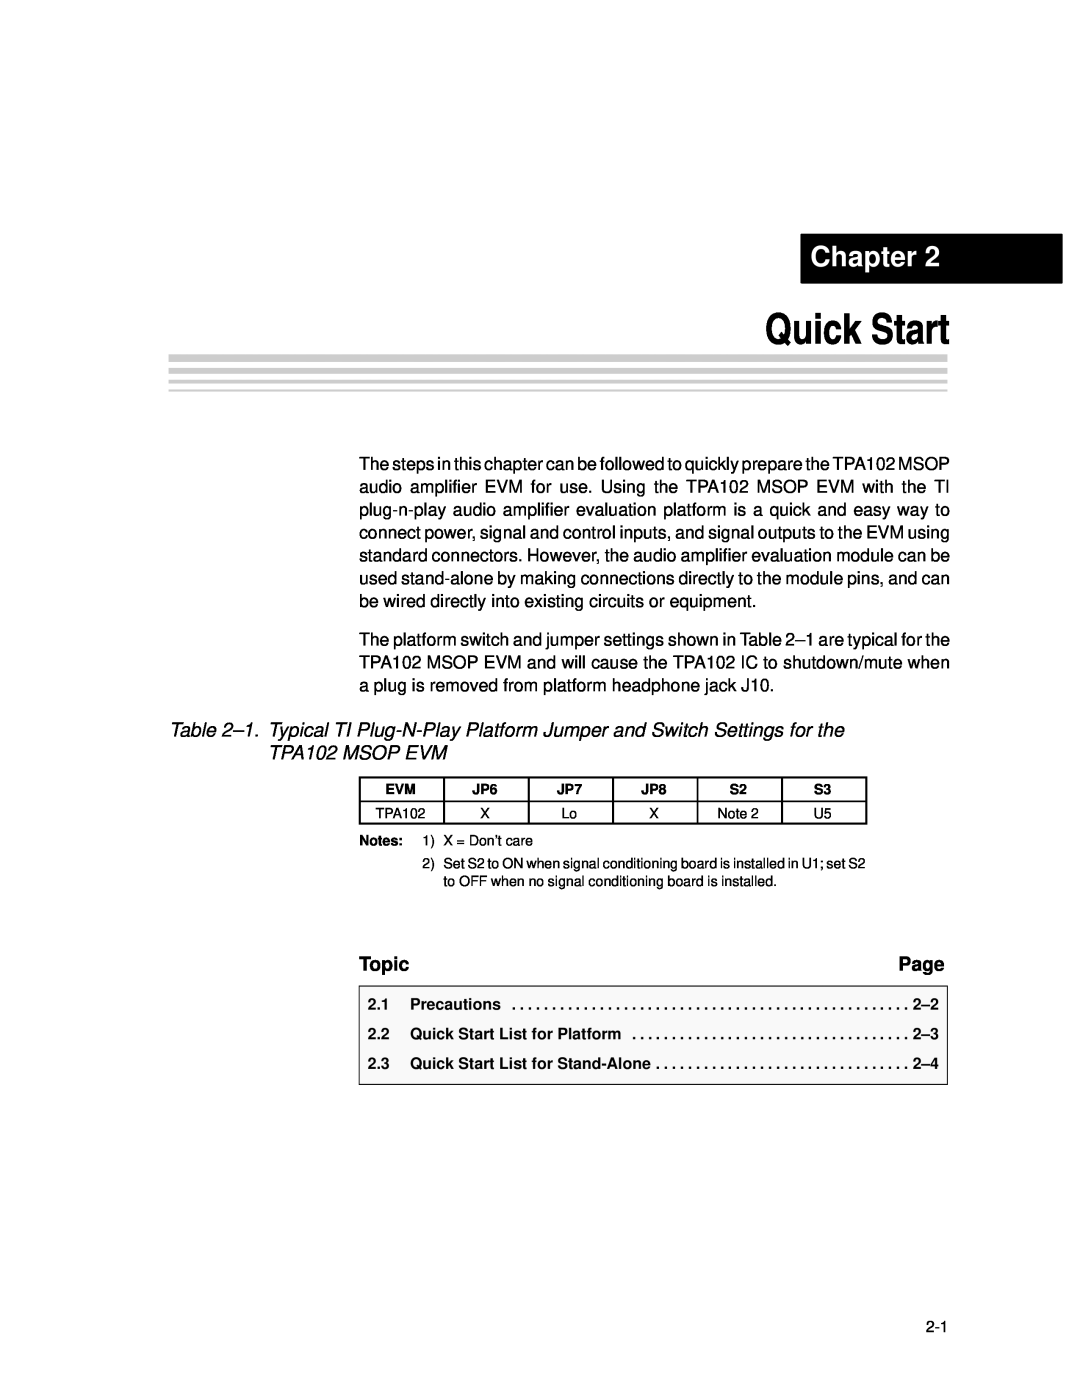 Texas Instruments TPA102 MSOP manual Chapter, Page, Topic, Precautions, Quick Start List for Platform 